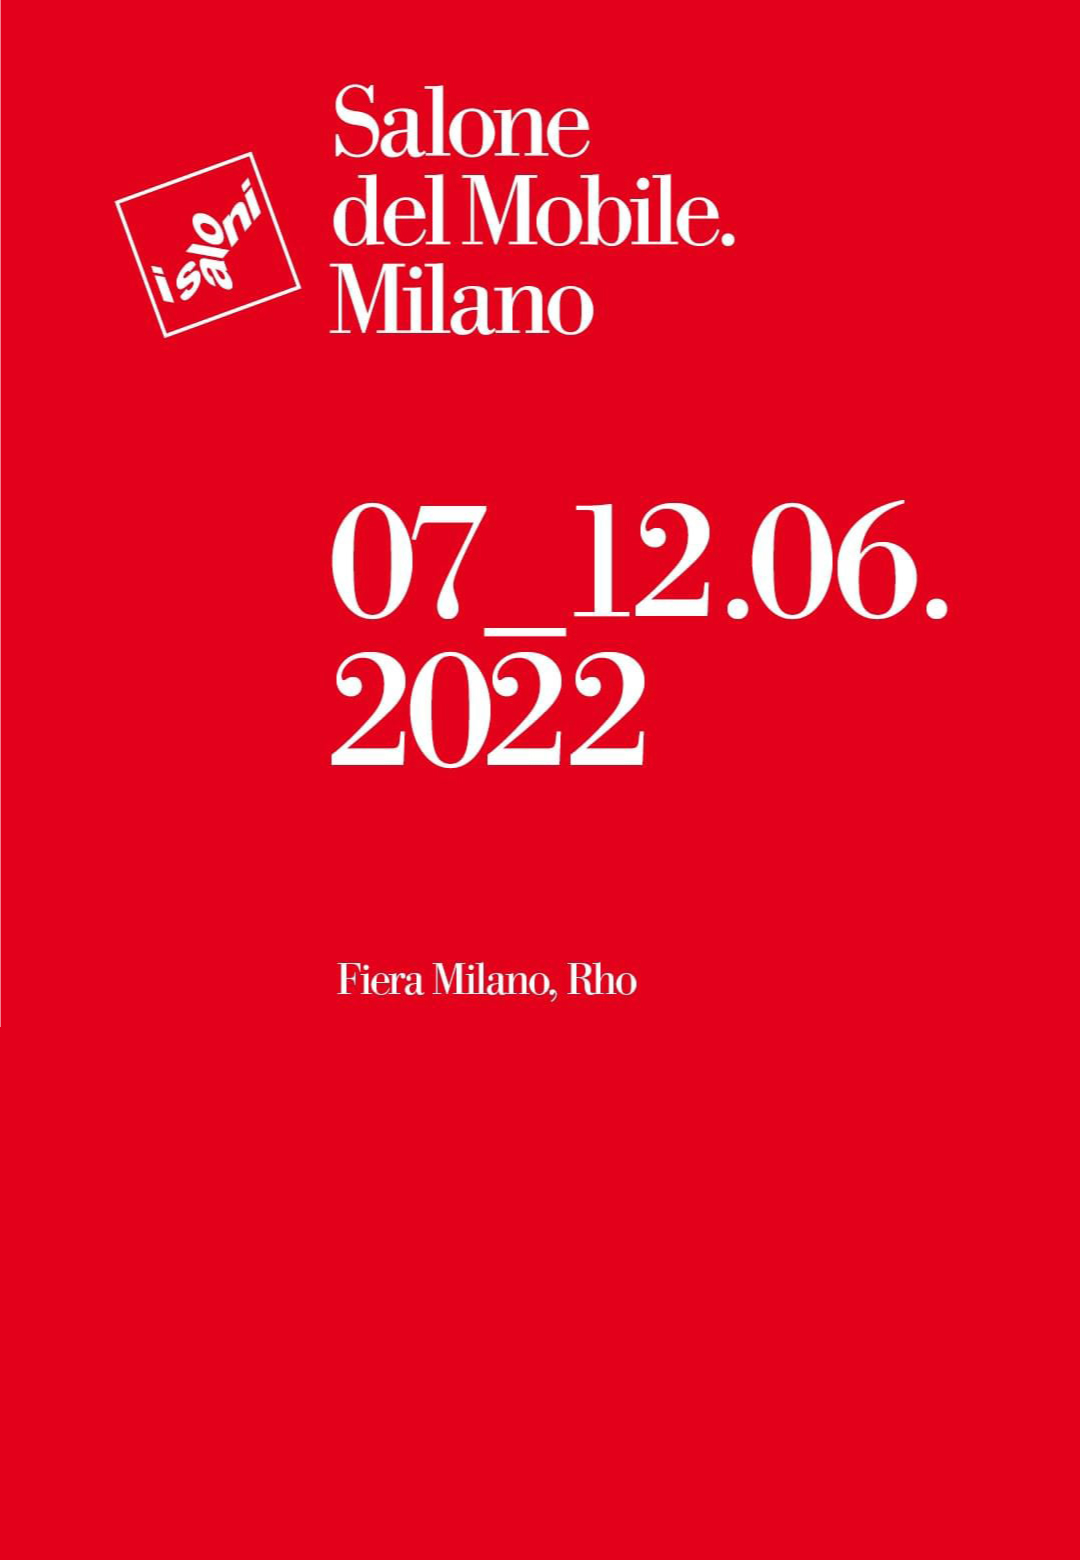 Themes and Projects Explored at the 2022 Salone del Mobile in Milano